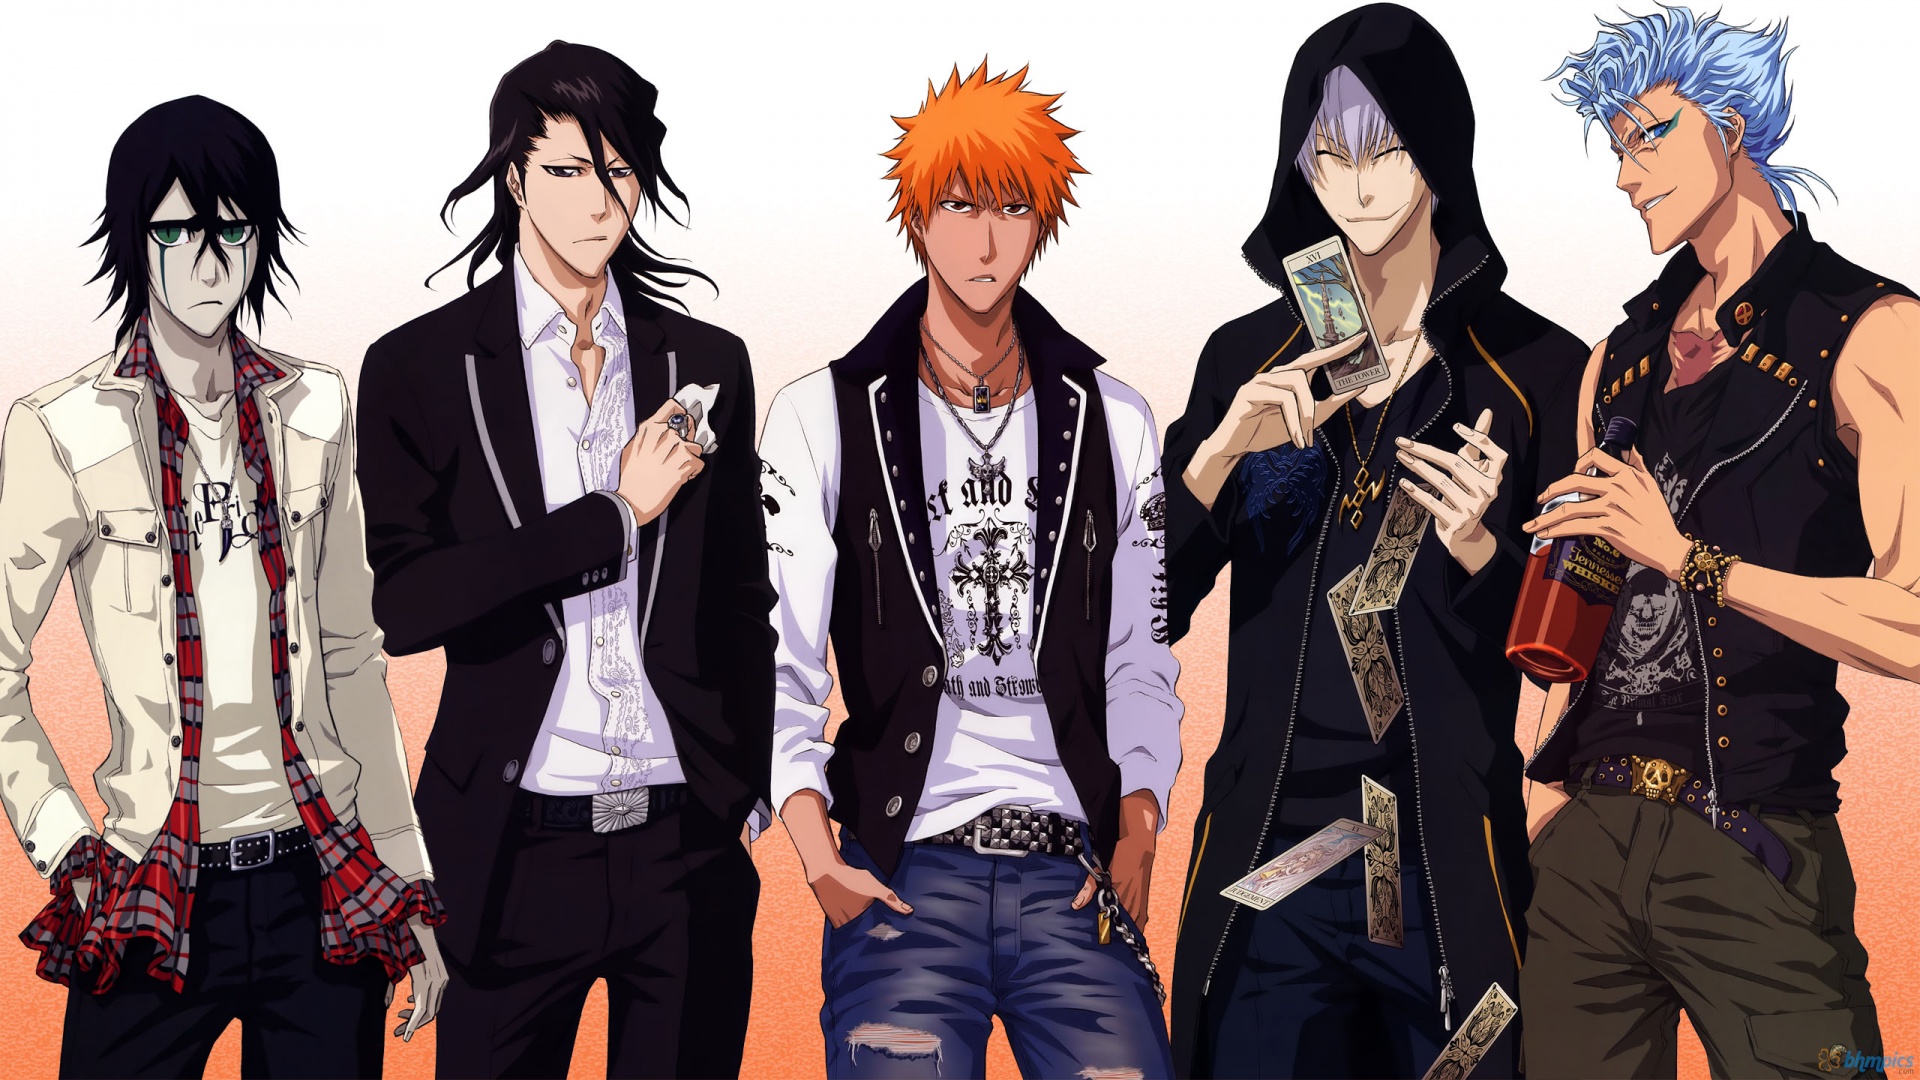 Bleach 4K wallpapers for your desktop or mobile screen free and easy to download